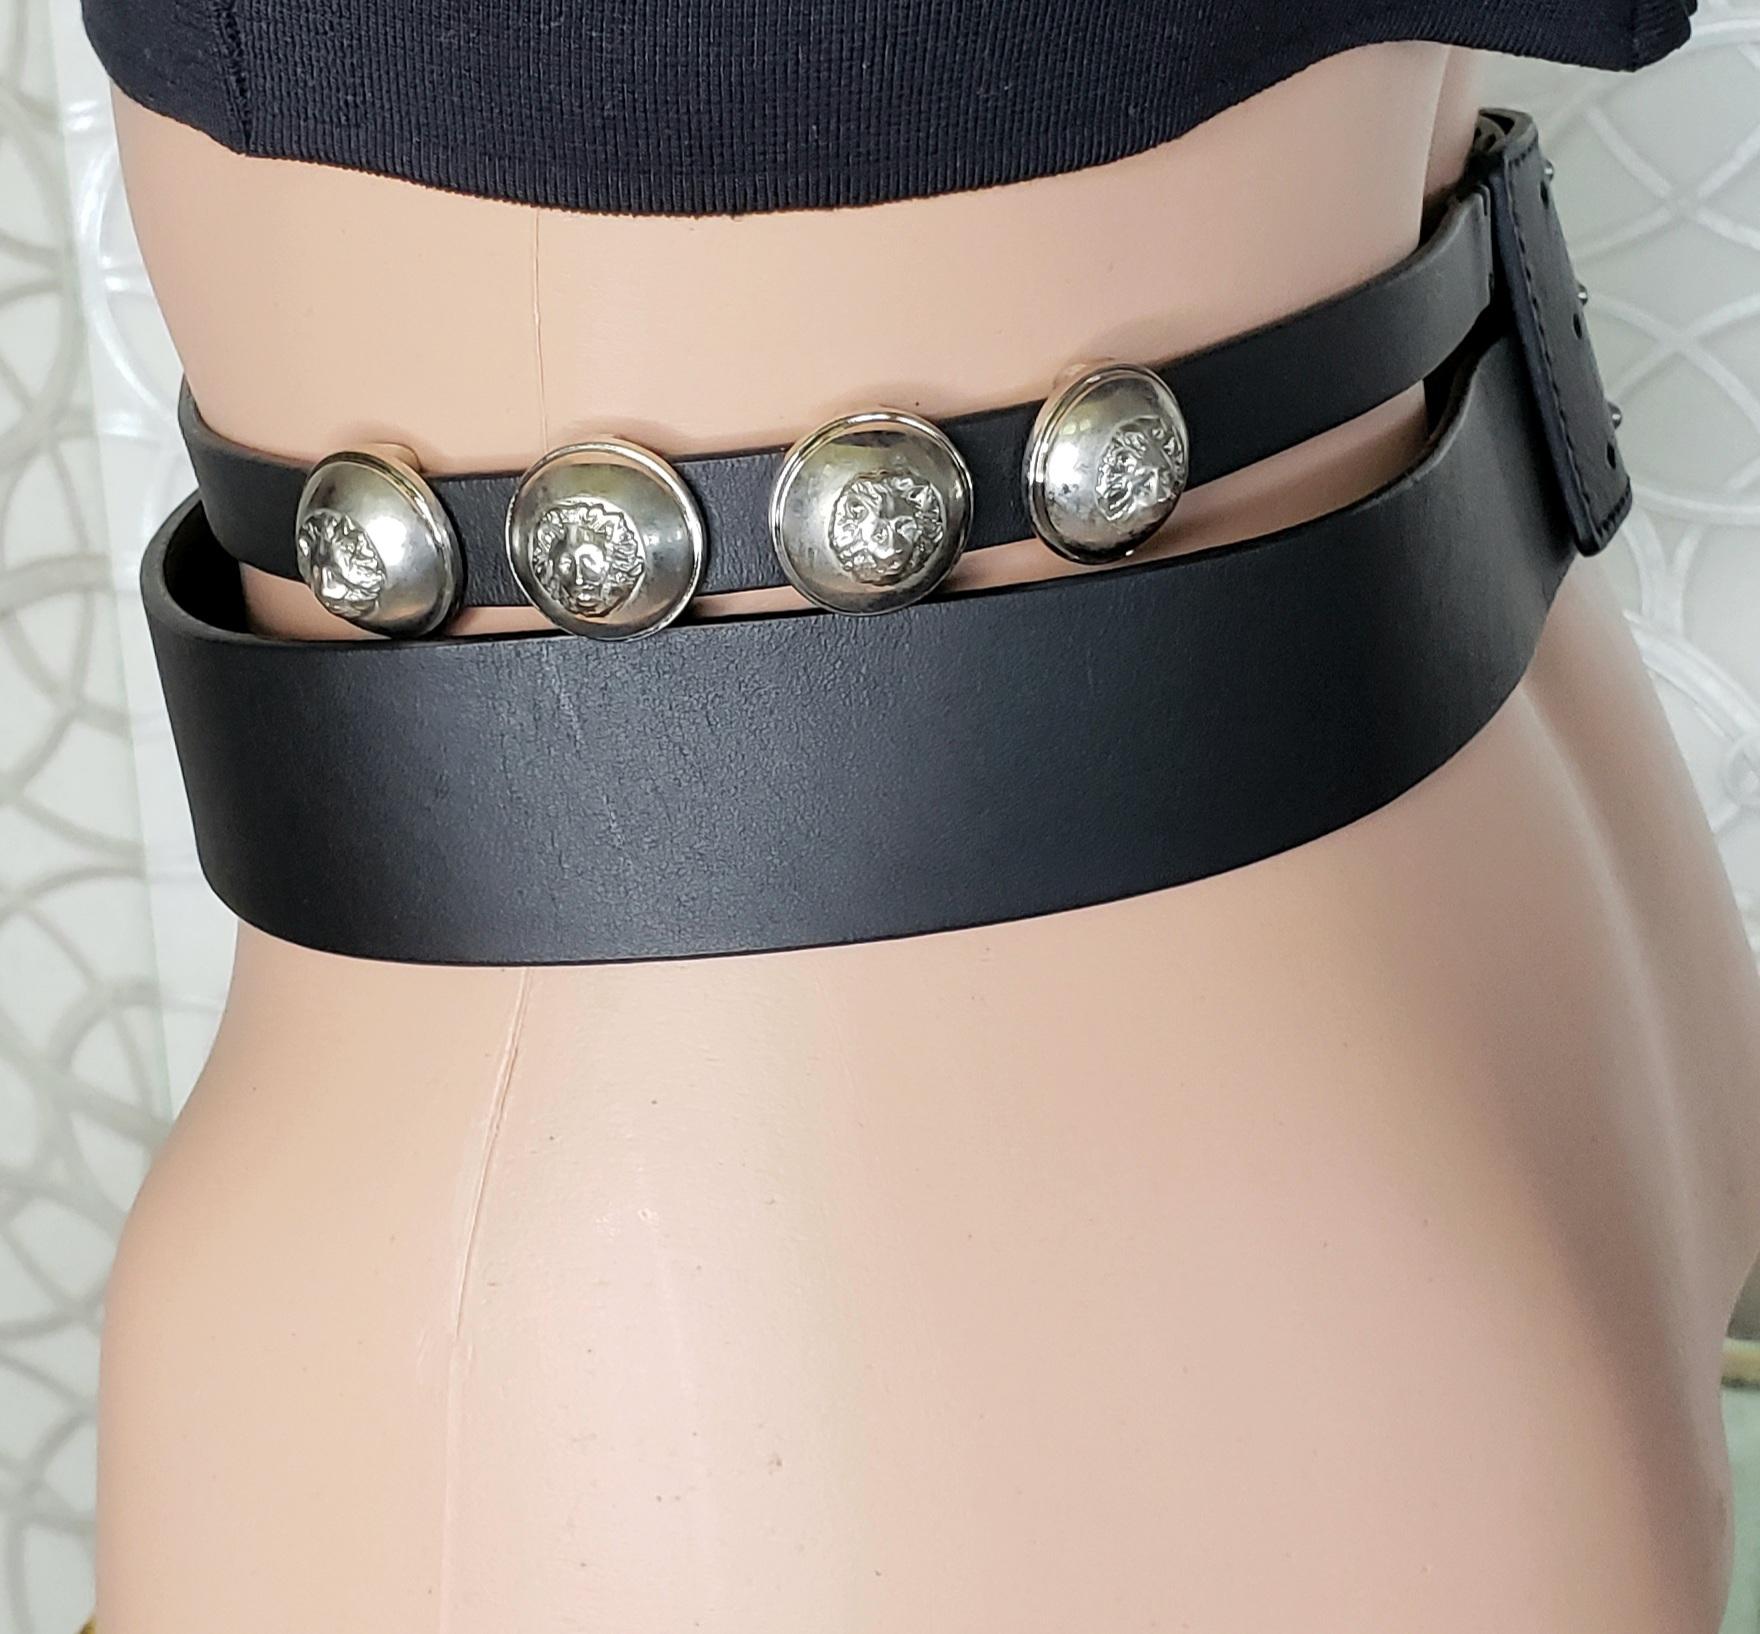 Beige VERSUS+VACCARELLO BLACK LEATHER LION STUDDED BELT w/SILVER-TONE BUCKLES 75/30 For Sale